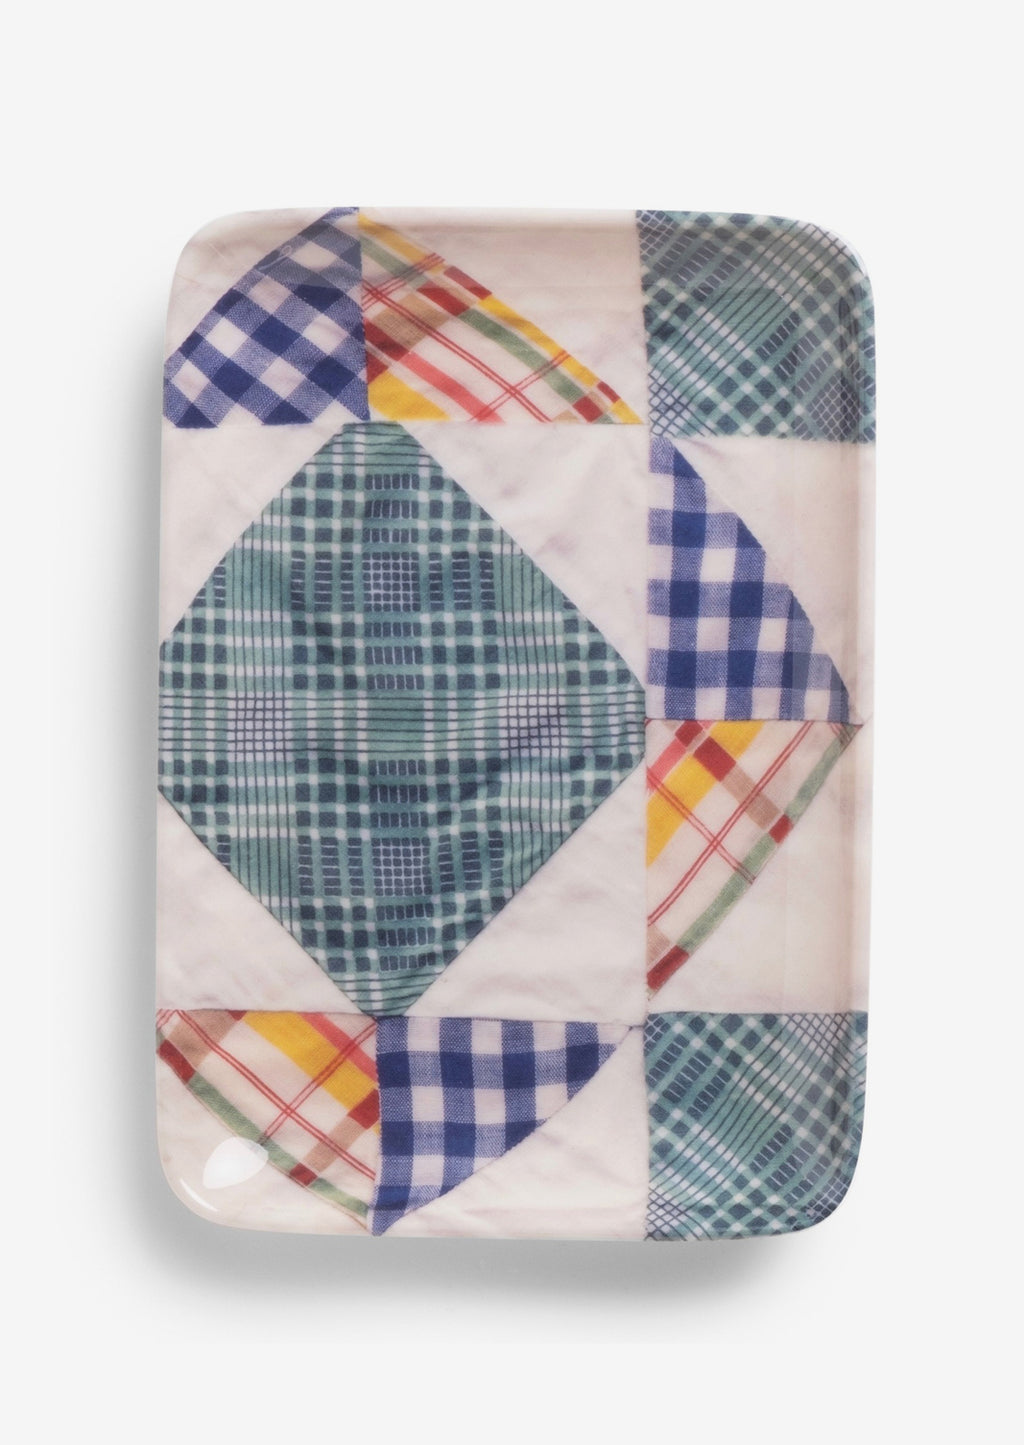 Small / Quilt Multi: A patterned melamine tray in quilt pattern.